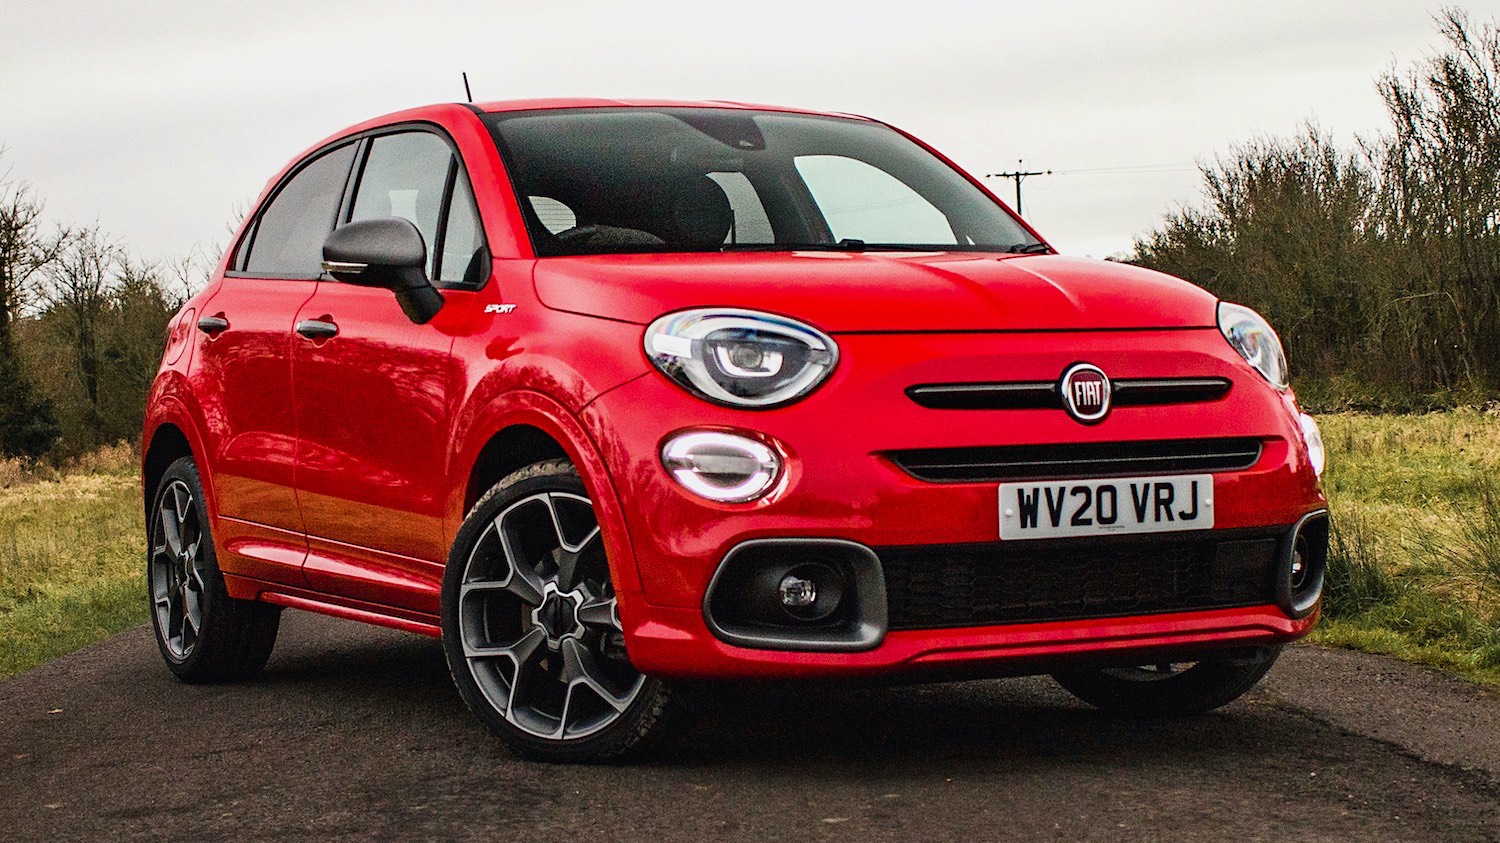 Drive.co.uk - Car Reviews - Fiat 500X Sport - It’ll get under your skin